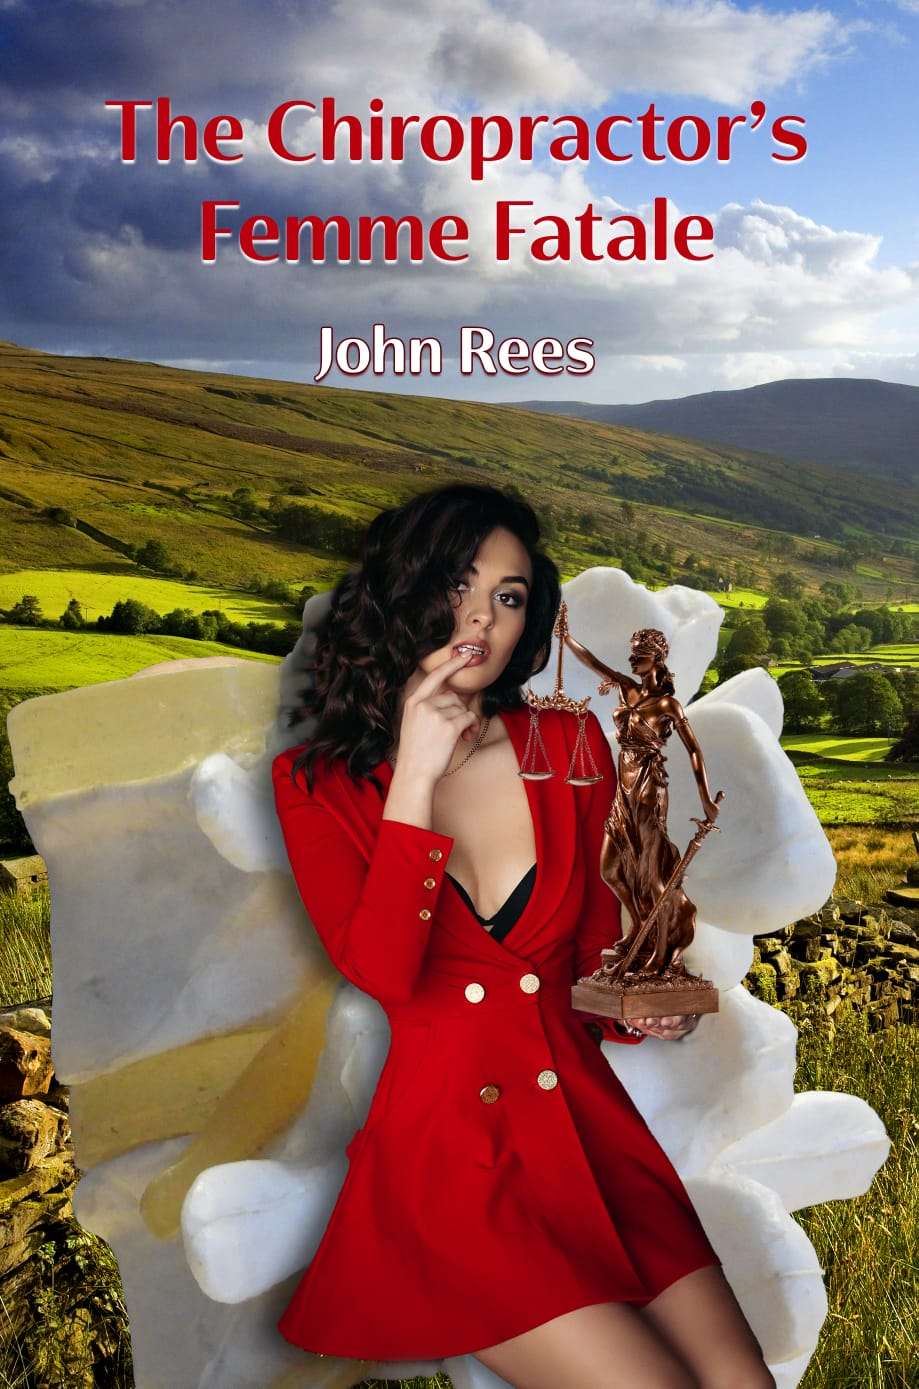 Introducing The Chiropractor's Femme Fatale A Compelling Novel Exploring the Intersection of Professionalism, Mental Health, and Ethical Dilemmas